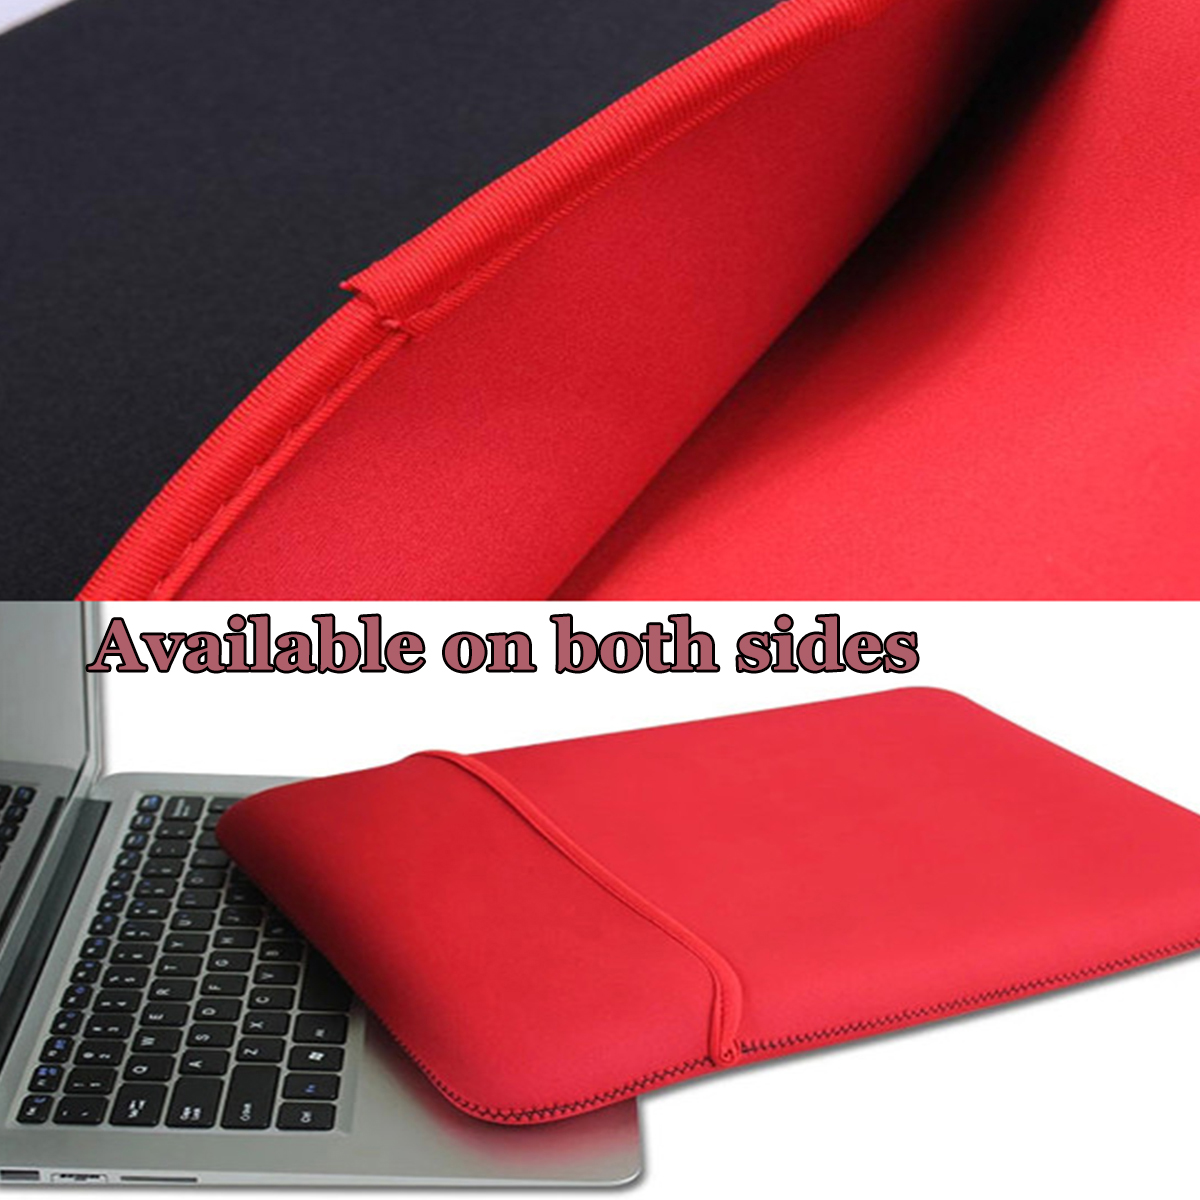 Bakeey-Double-faced-Waterproof-Laptop-Notebook-Protective-Bag-Tablet-Sleeve-Cover-Pouch-for-13--17-i-1633528-3